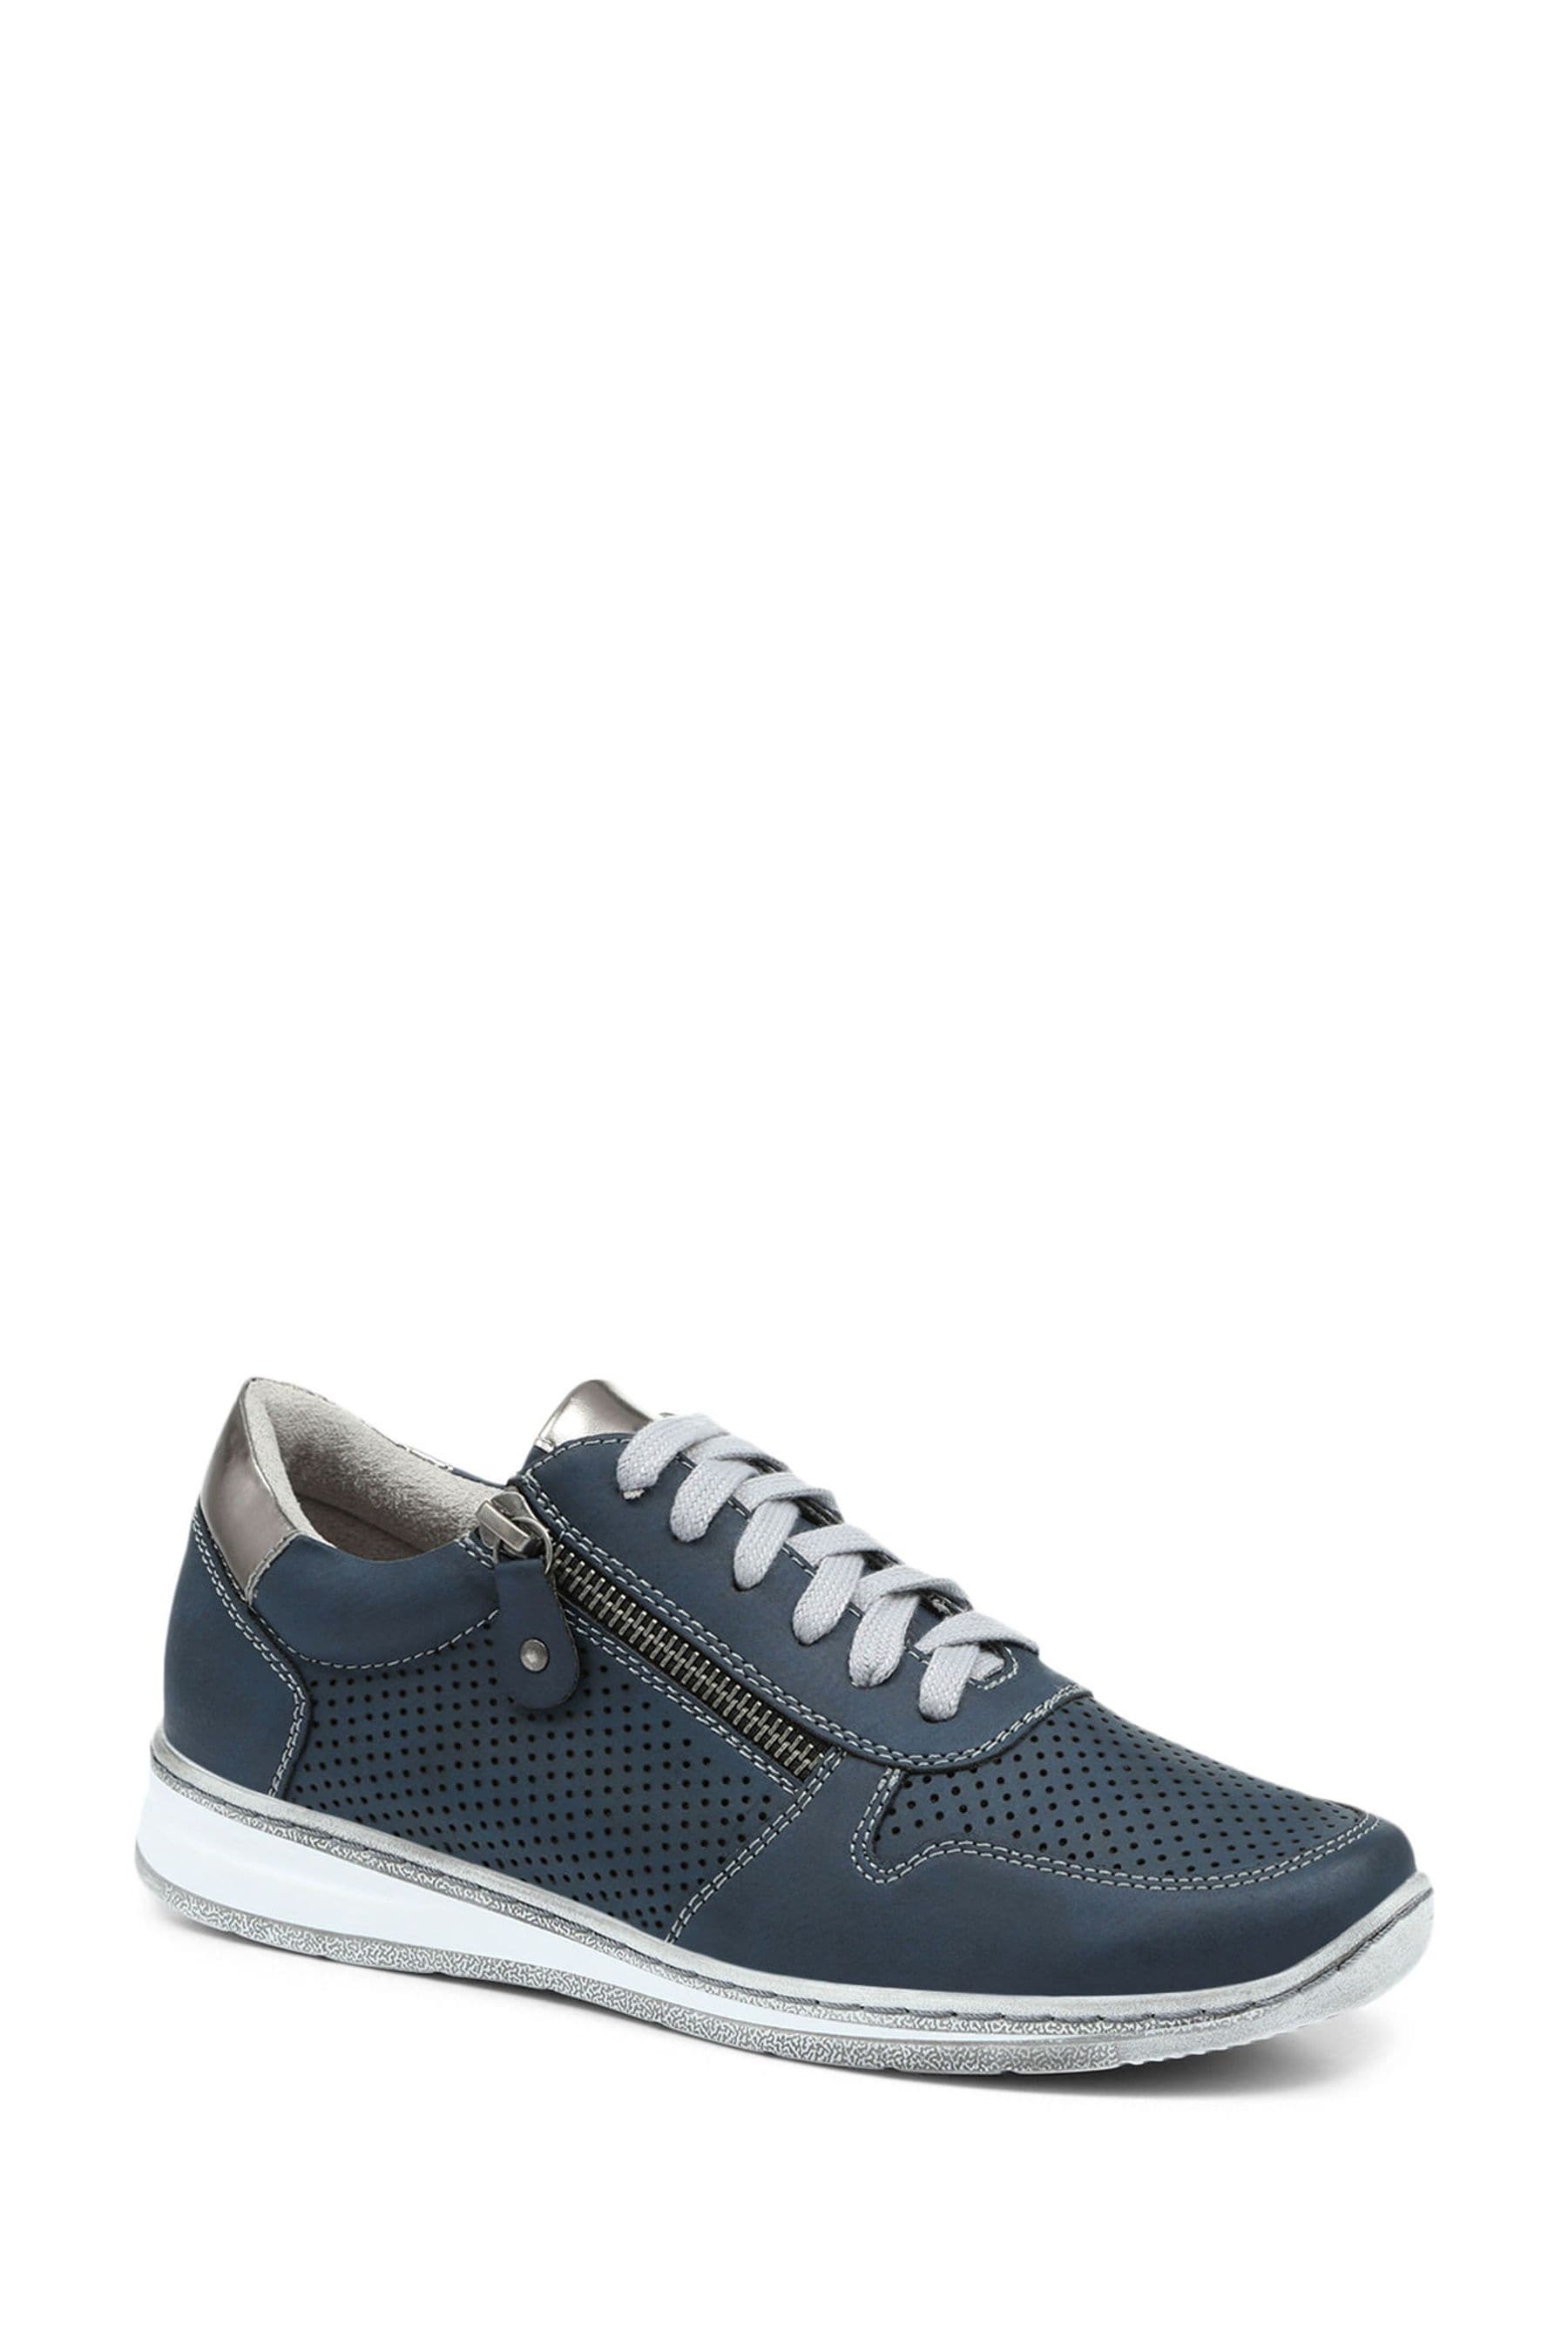 Buy Pavers Casual Lace-Up Trainers from the Next UK online shop